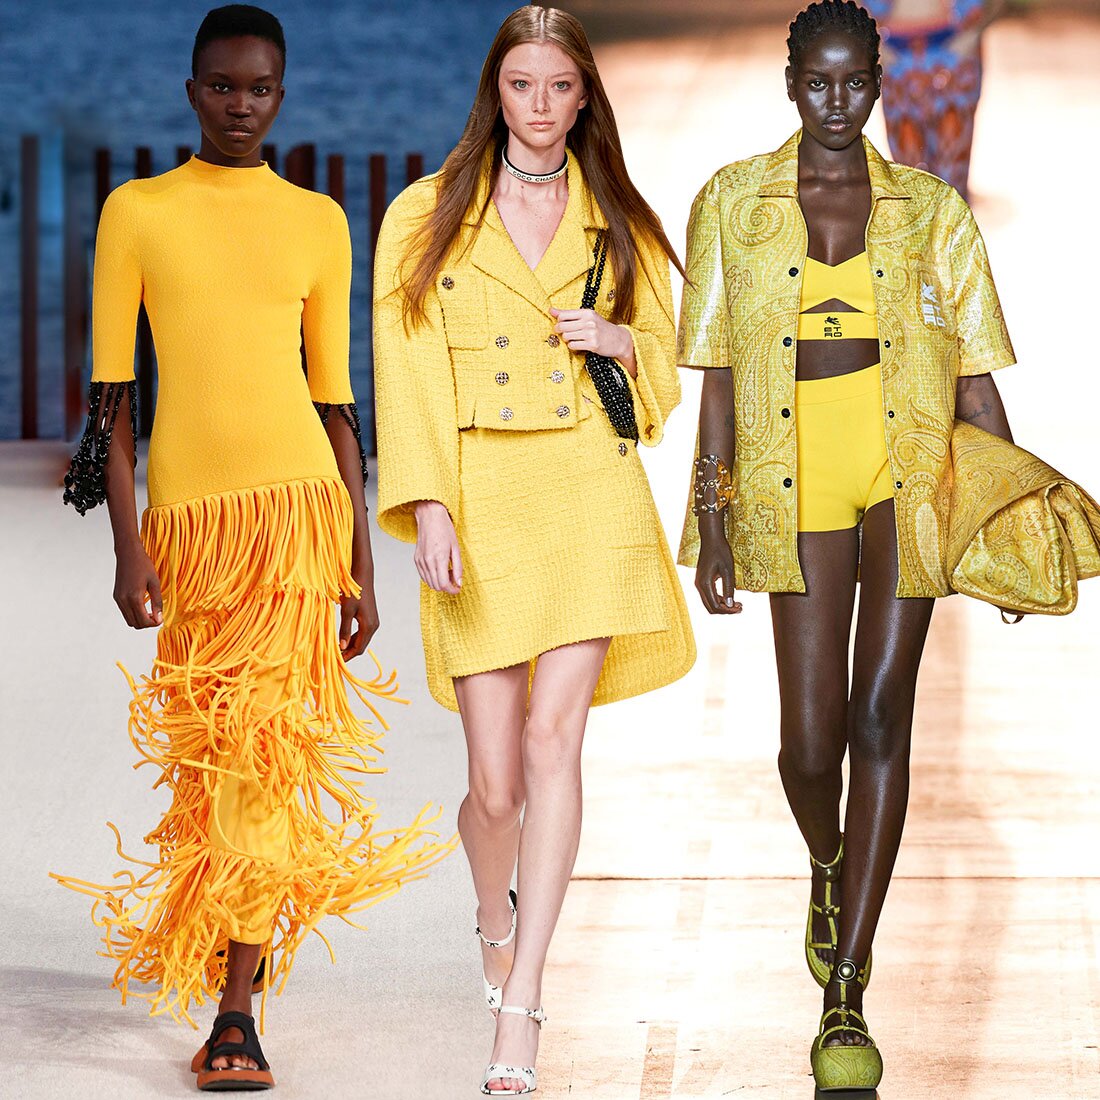 head-to-toe-yellow-is-spring-2022’s-most-optimistic-color-trend